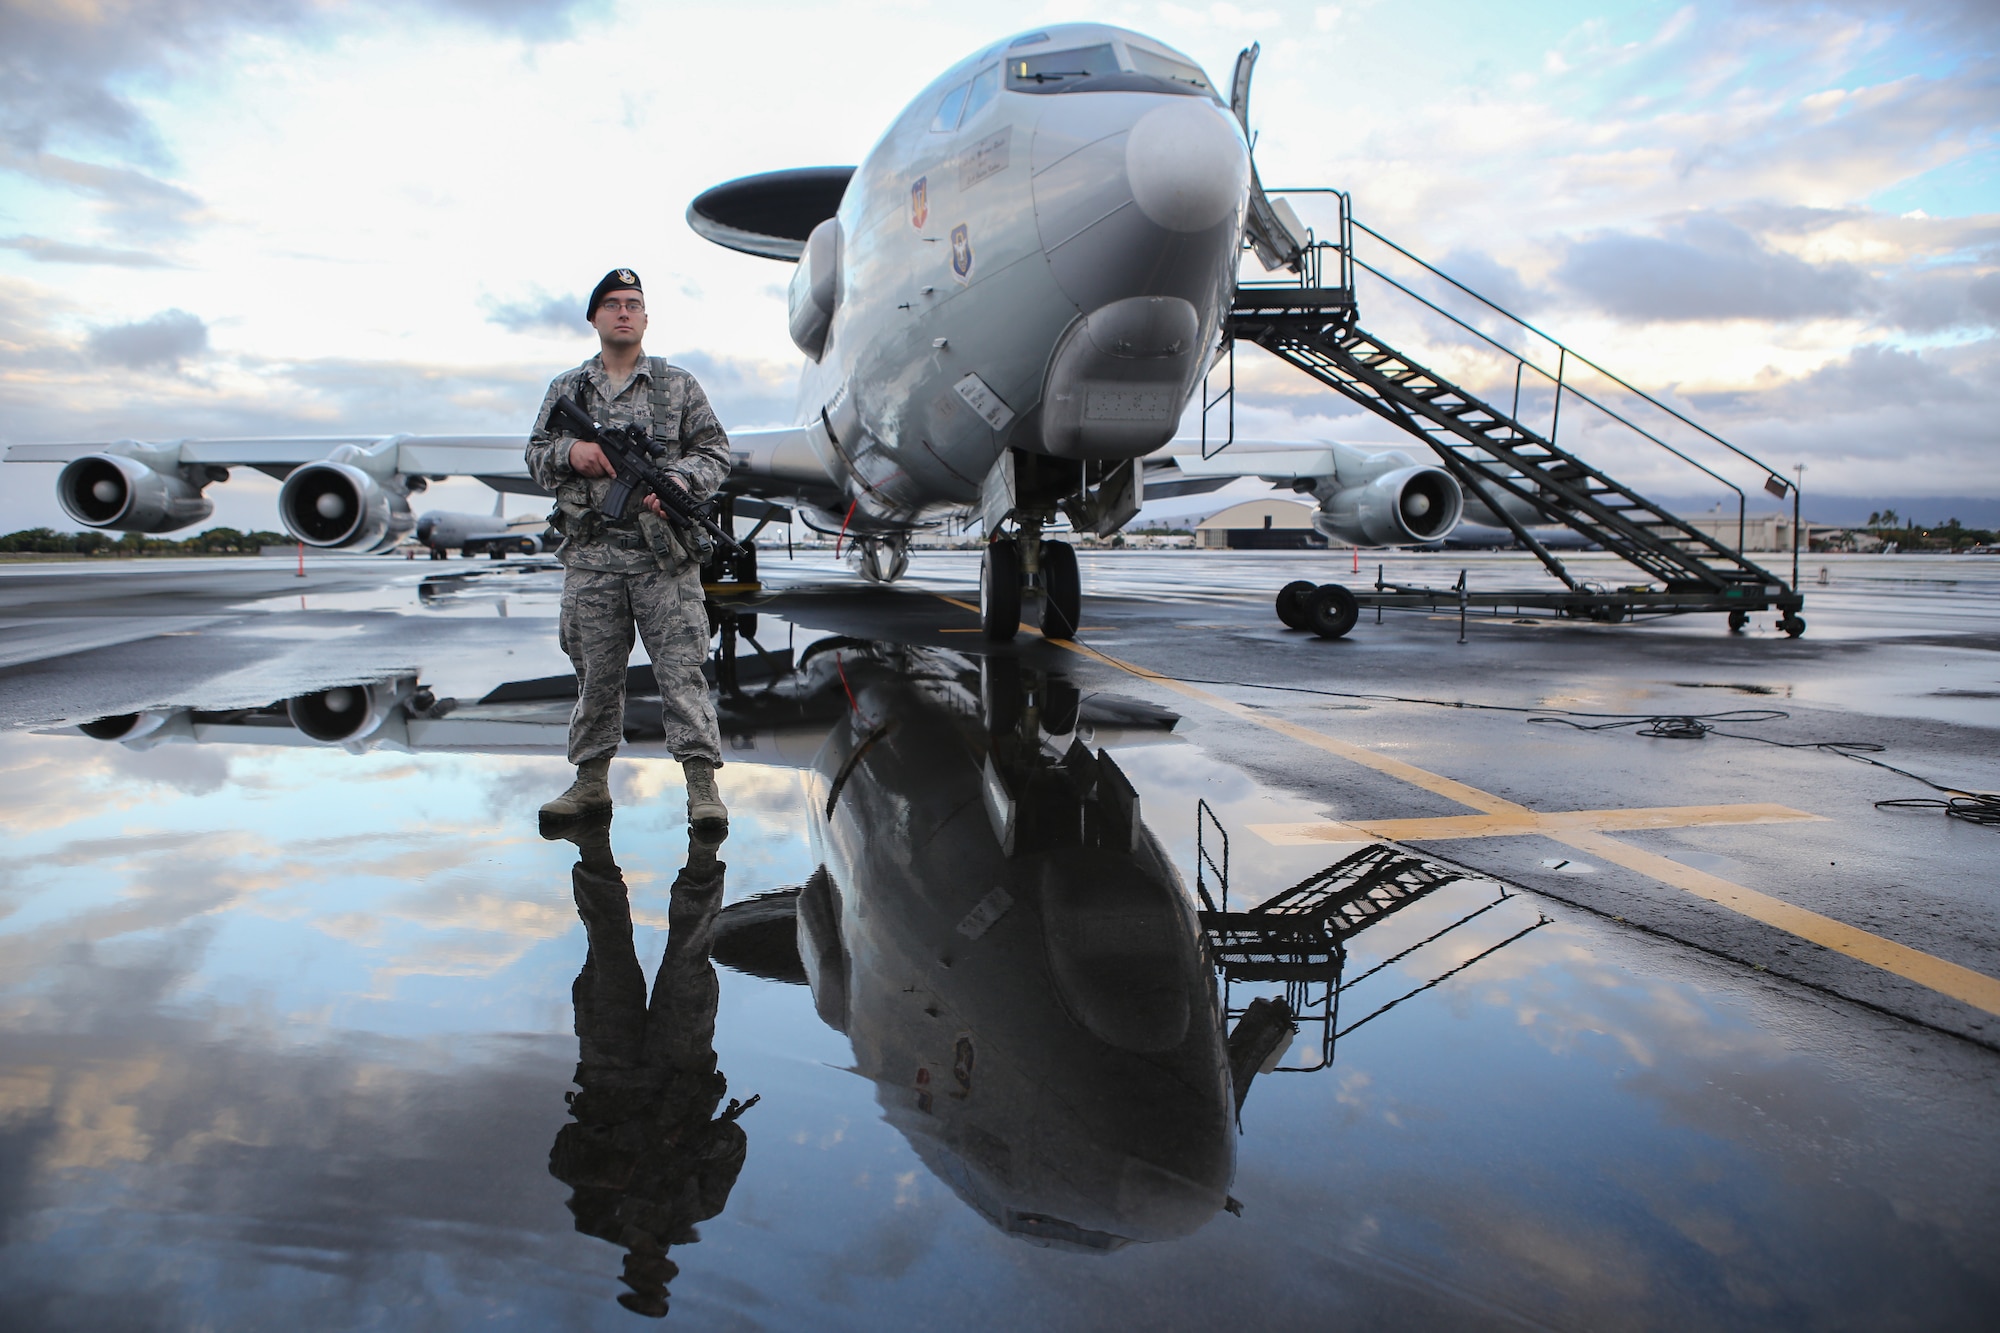 Staff Sgt. Robert Abbey, assigned to the 507th Security Forces Squadron at Tinker Air Force Base, Okla., guards an E-3 Sentry on July 20 on the flight line at Joint Base Pearl Harbor-Hickam, Hawaii. Security forces Airmen from the 507th are supporting reservists from the 513th Air Control Group as they fly missions in support of the Rim of the Pacific 2014 exercise. (U.S. Air Force photo by Staff Sgt. Caleb Wanzer)